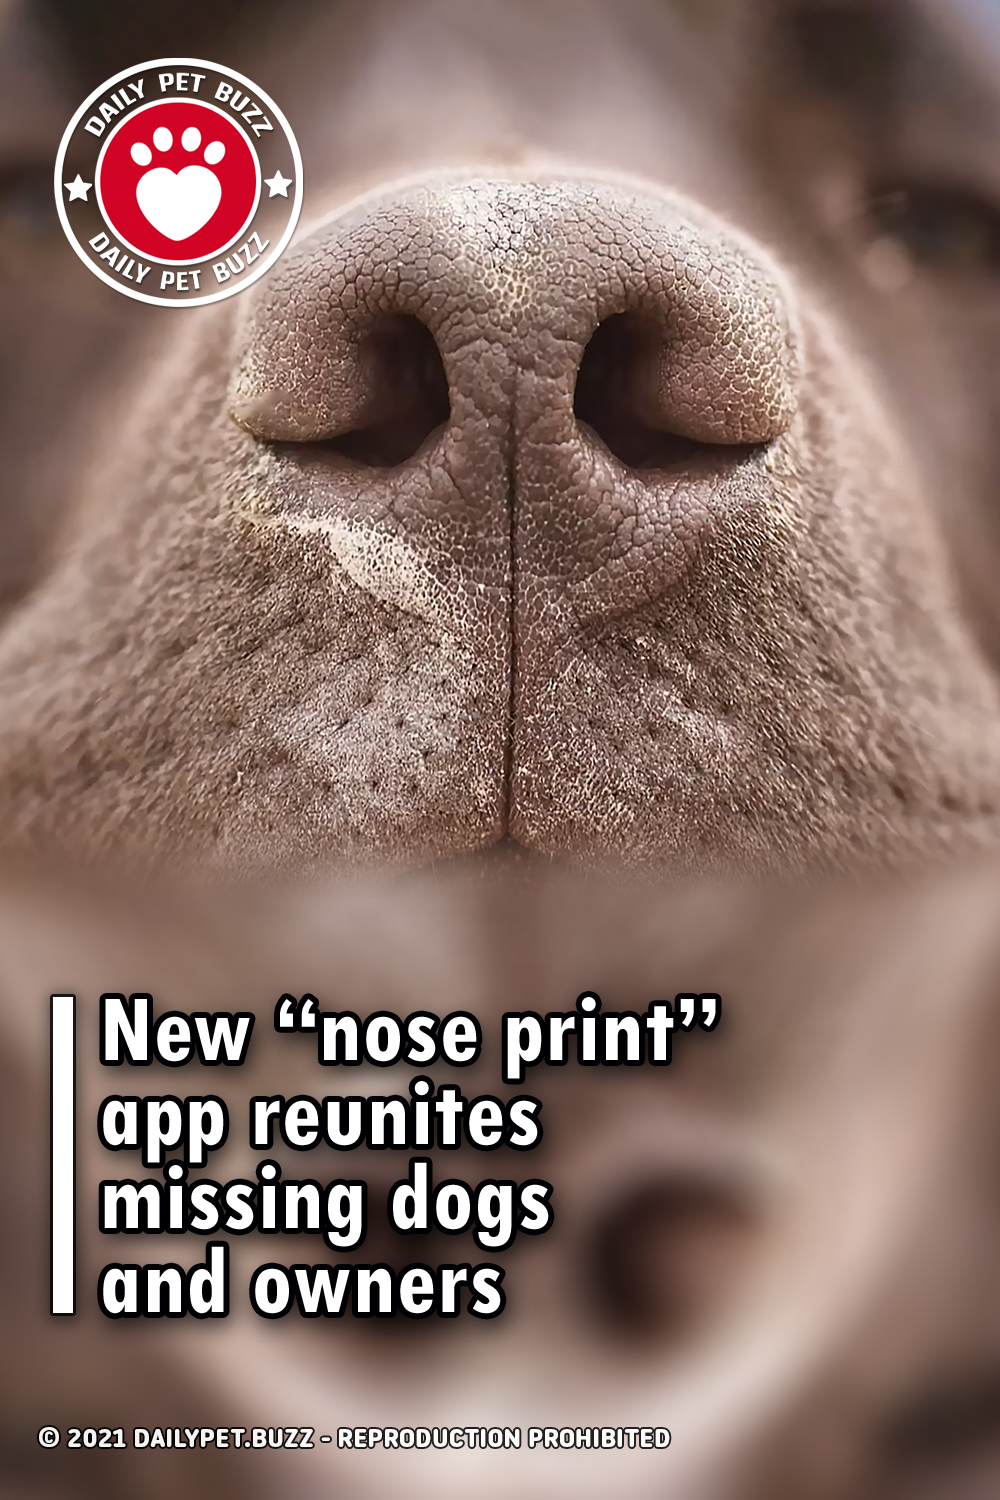 New “nose print” app reunites missing dogs and owners